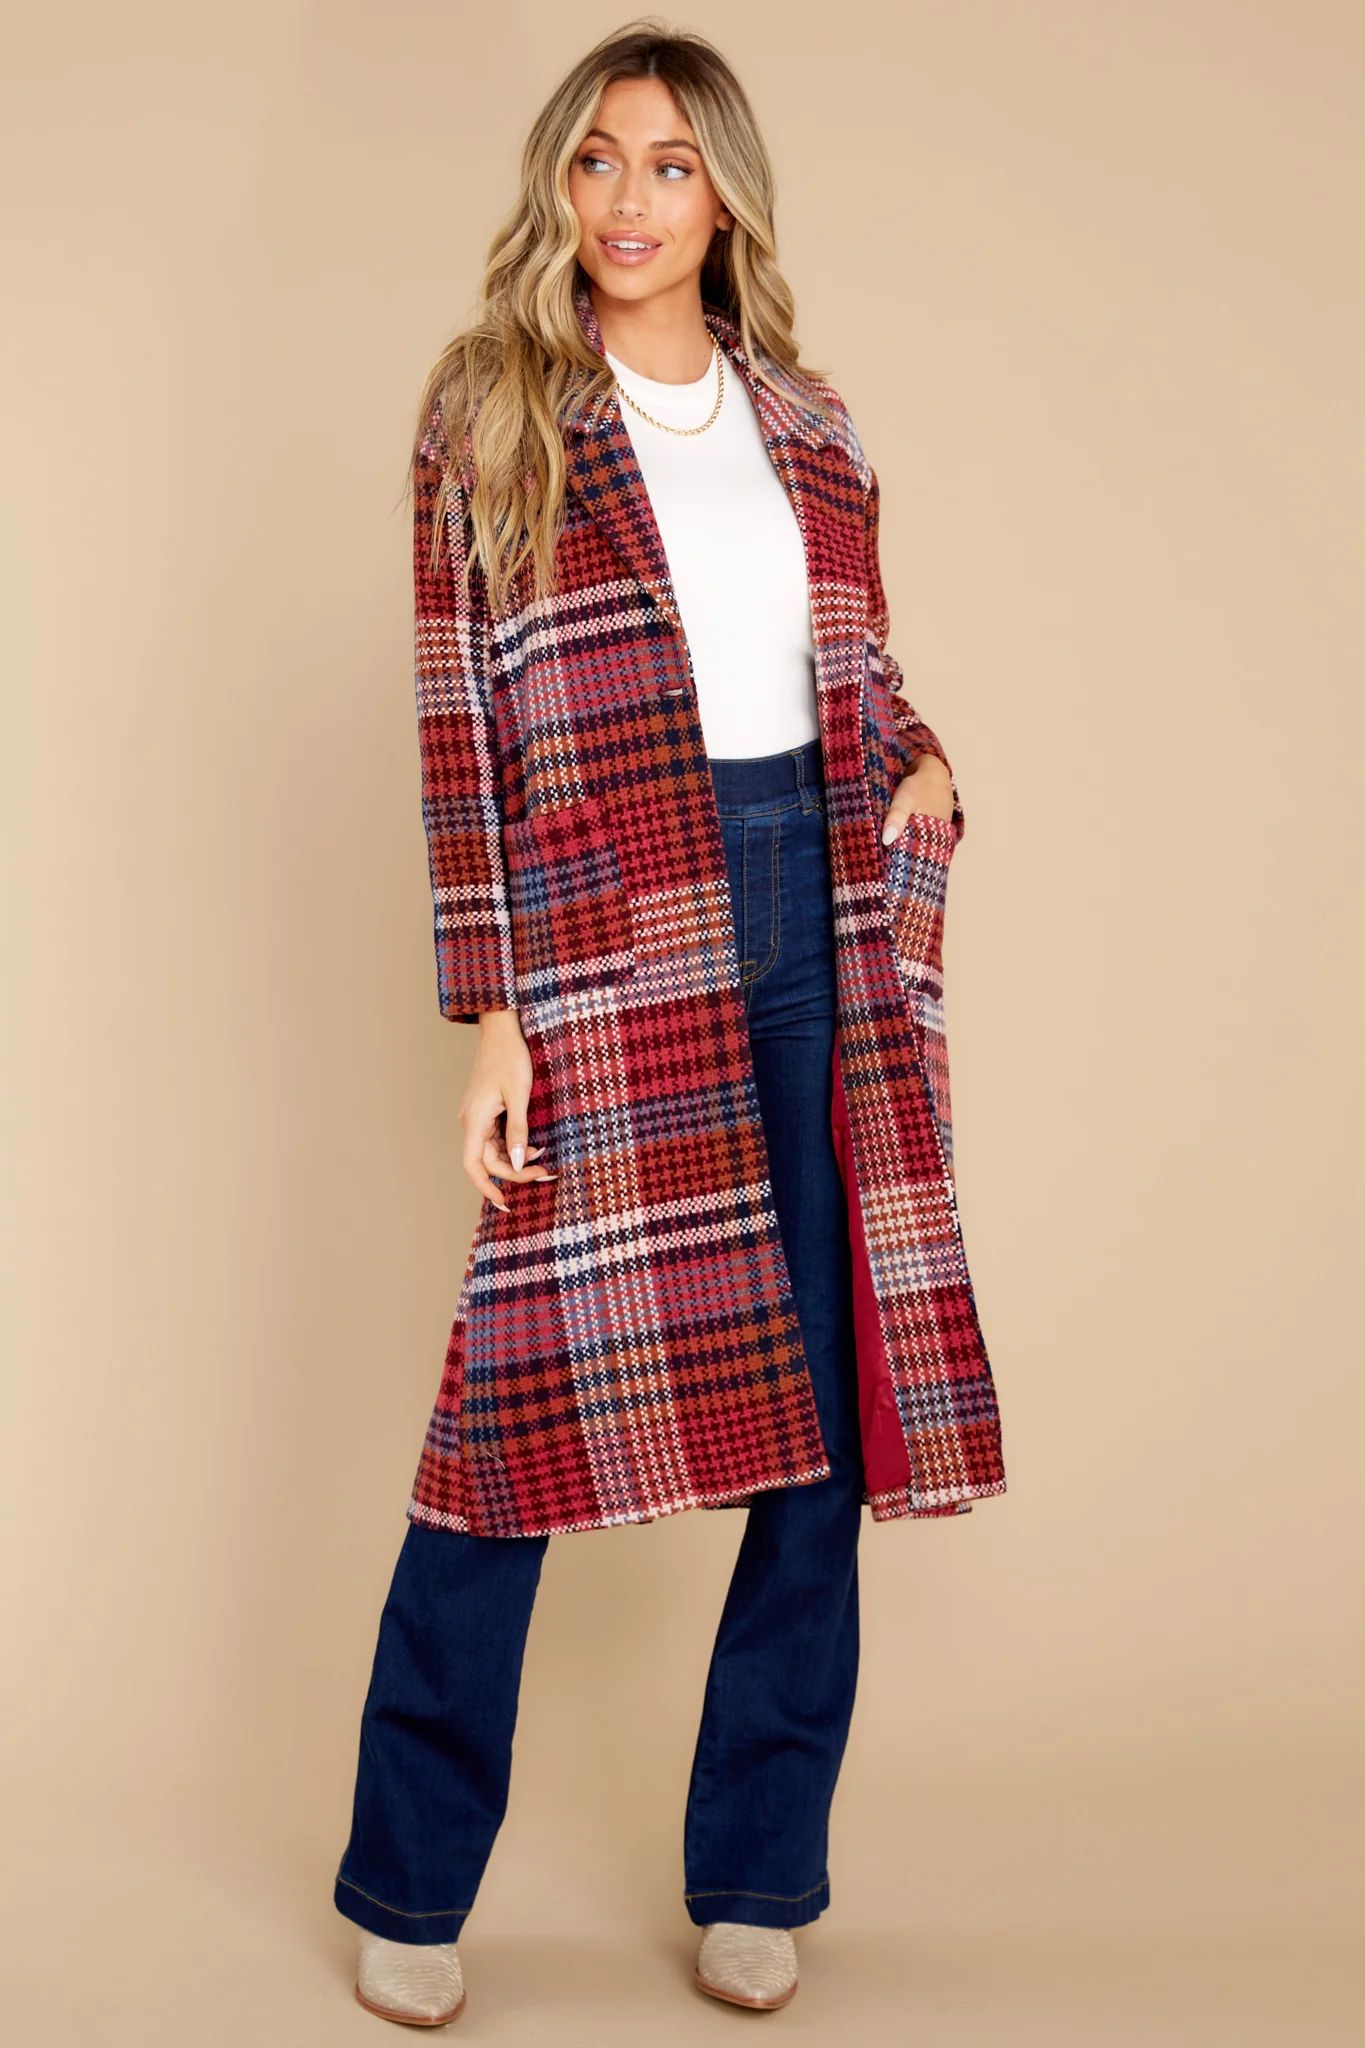 Ready For Change Berry Pink Plaid Coat | Red Dress 